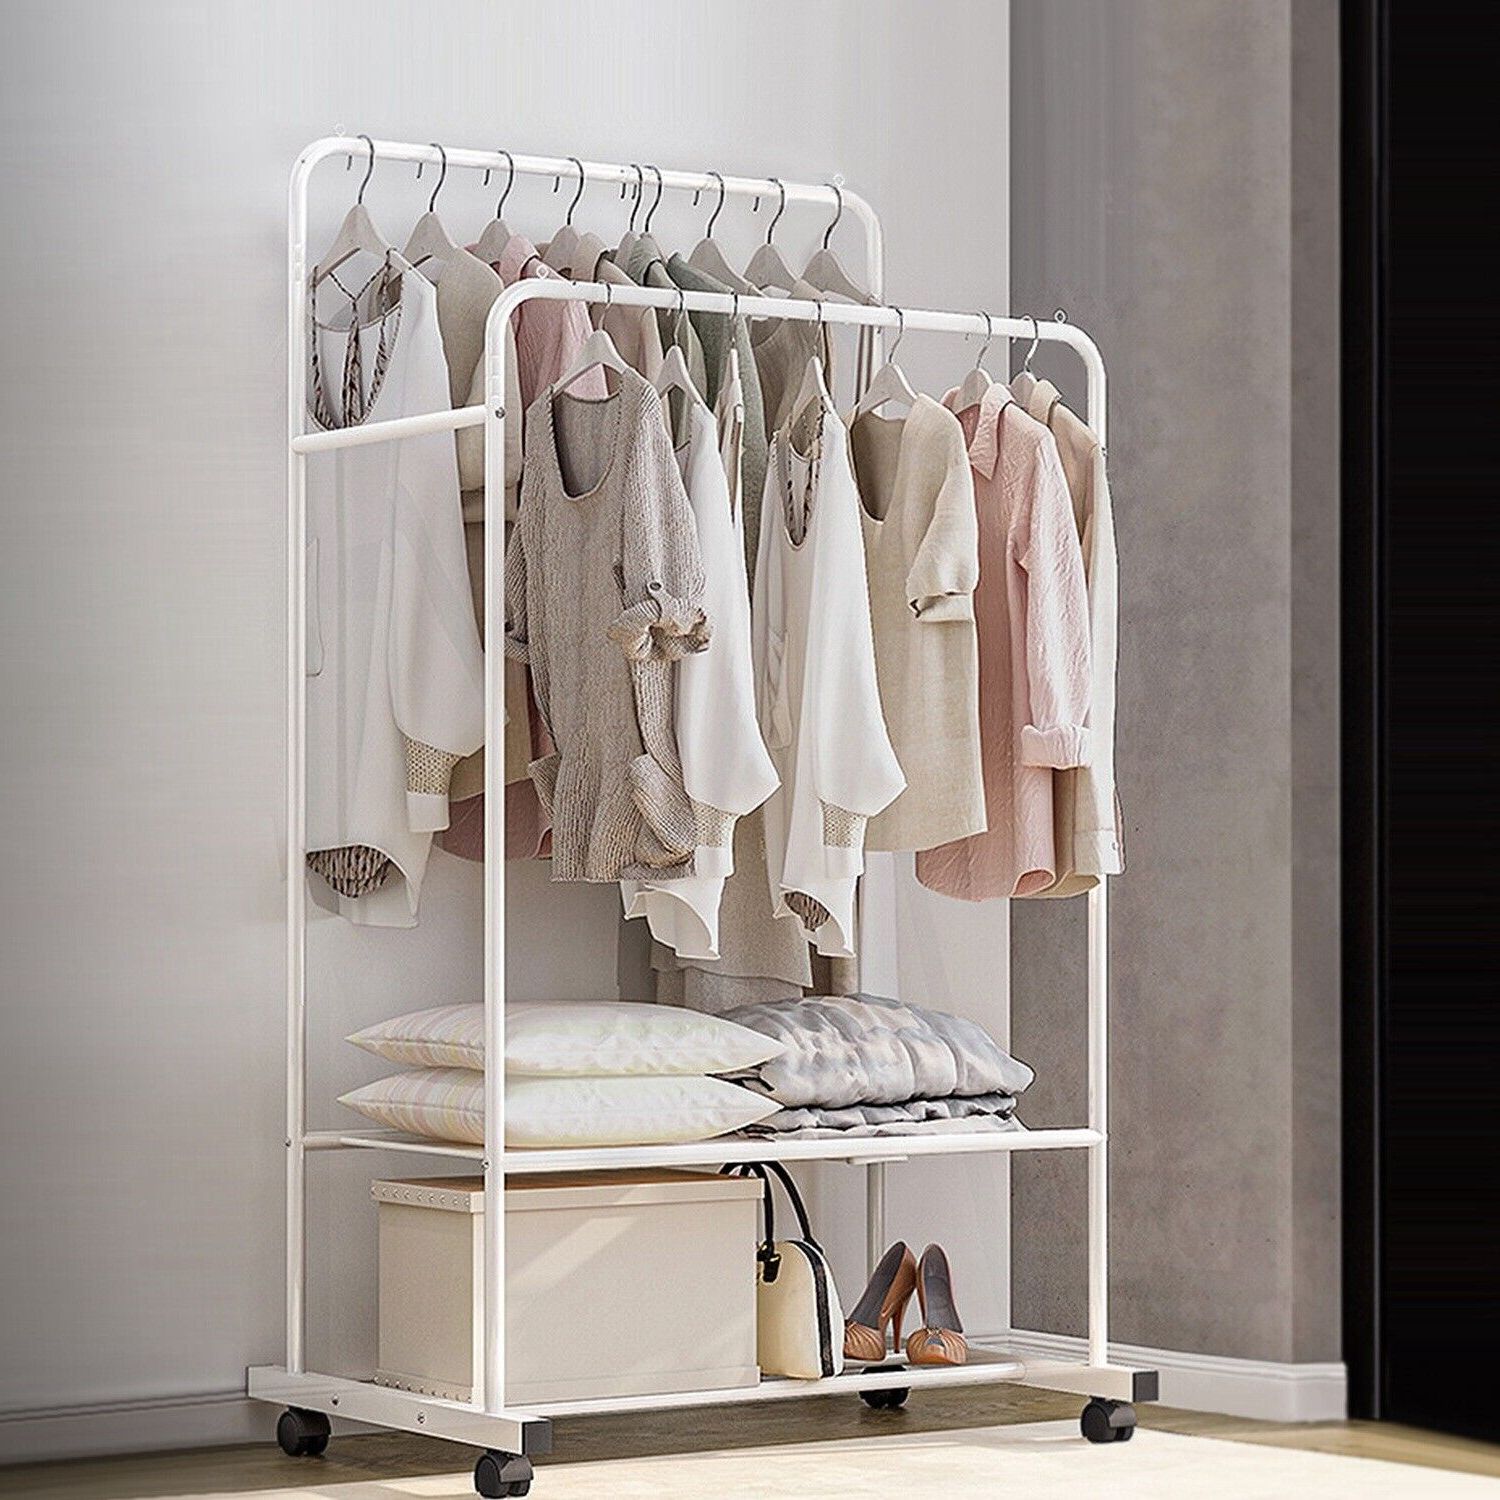 Garment Clothing Rack Double Rails Hanging Shelf Closet Storage W/rolling  Wheel | Ebay Intended For Double Hanging Rail For Wardrobes (View 13 of 20)